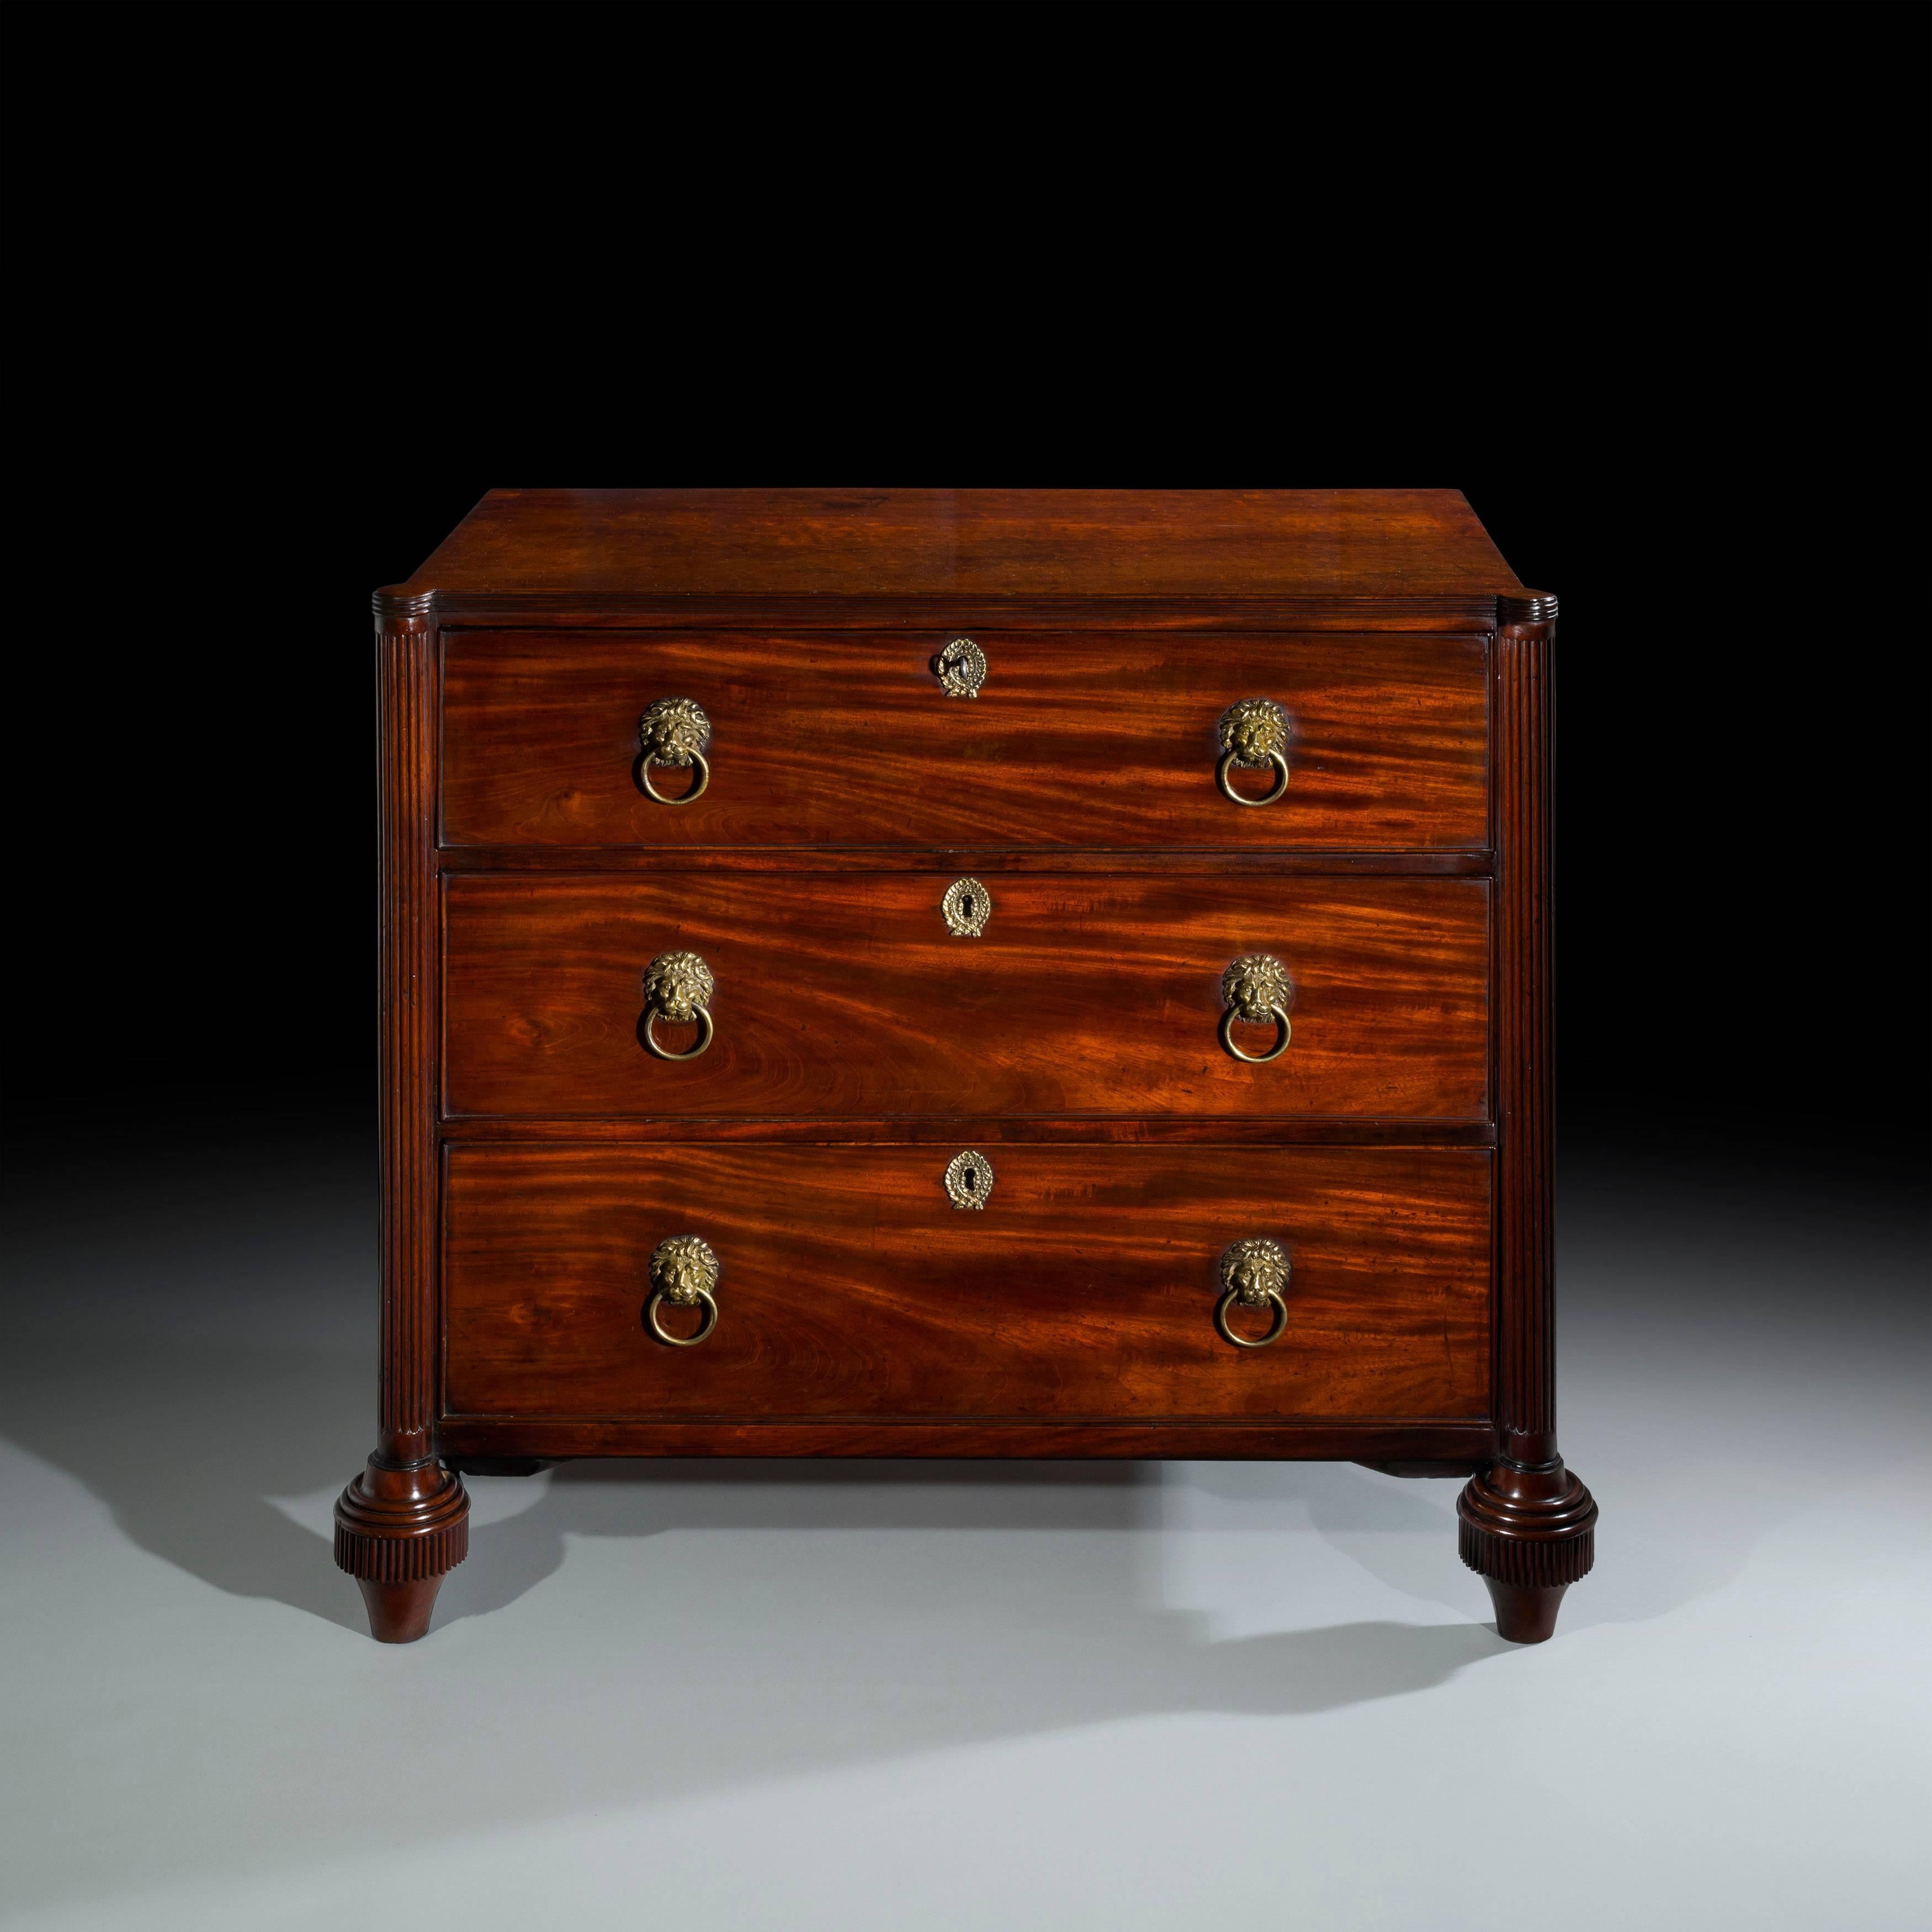 Carved English 18th Century Mahogany Gillows Chest of Drawers